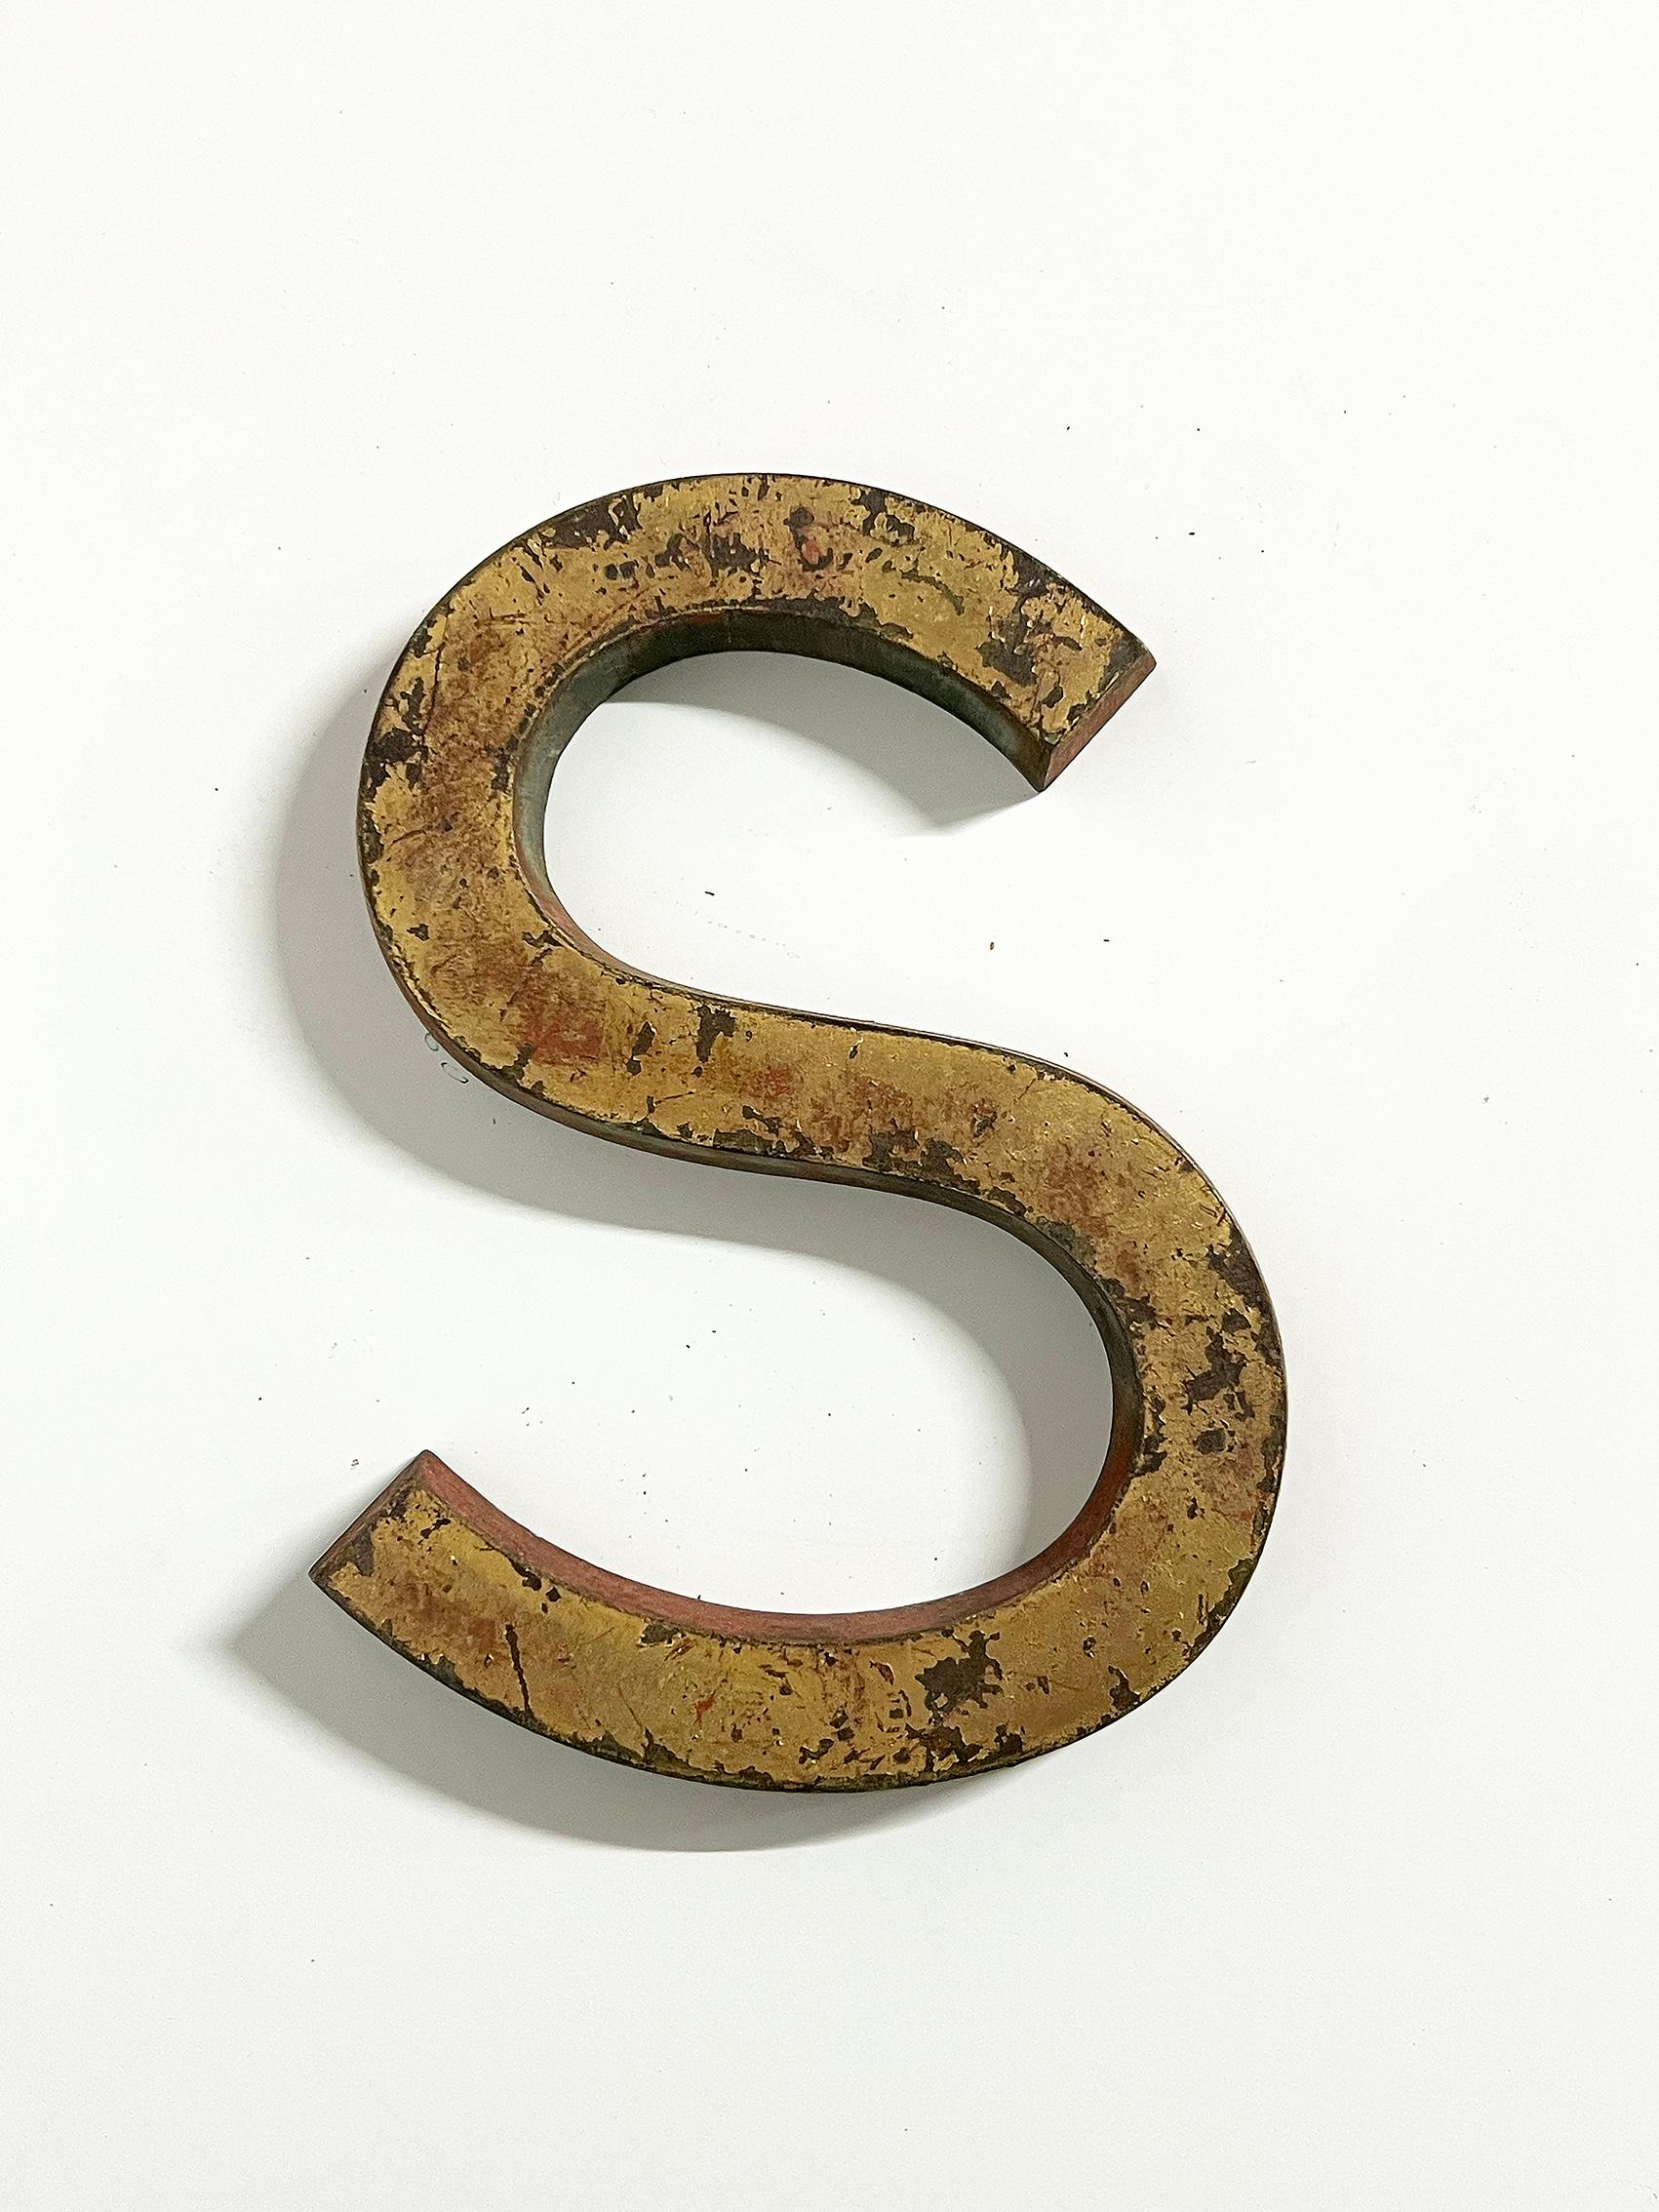 Vintage letter S in solid brass, covered with old paint (red & gold), Sweden ca 1940's.
Wear and patina consistent with age and use. Paint loss as seen on the pictures.

